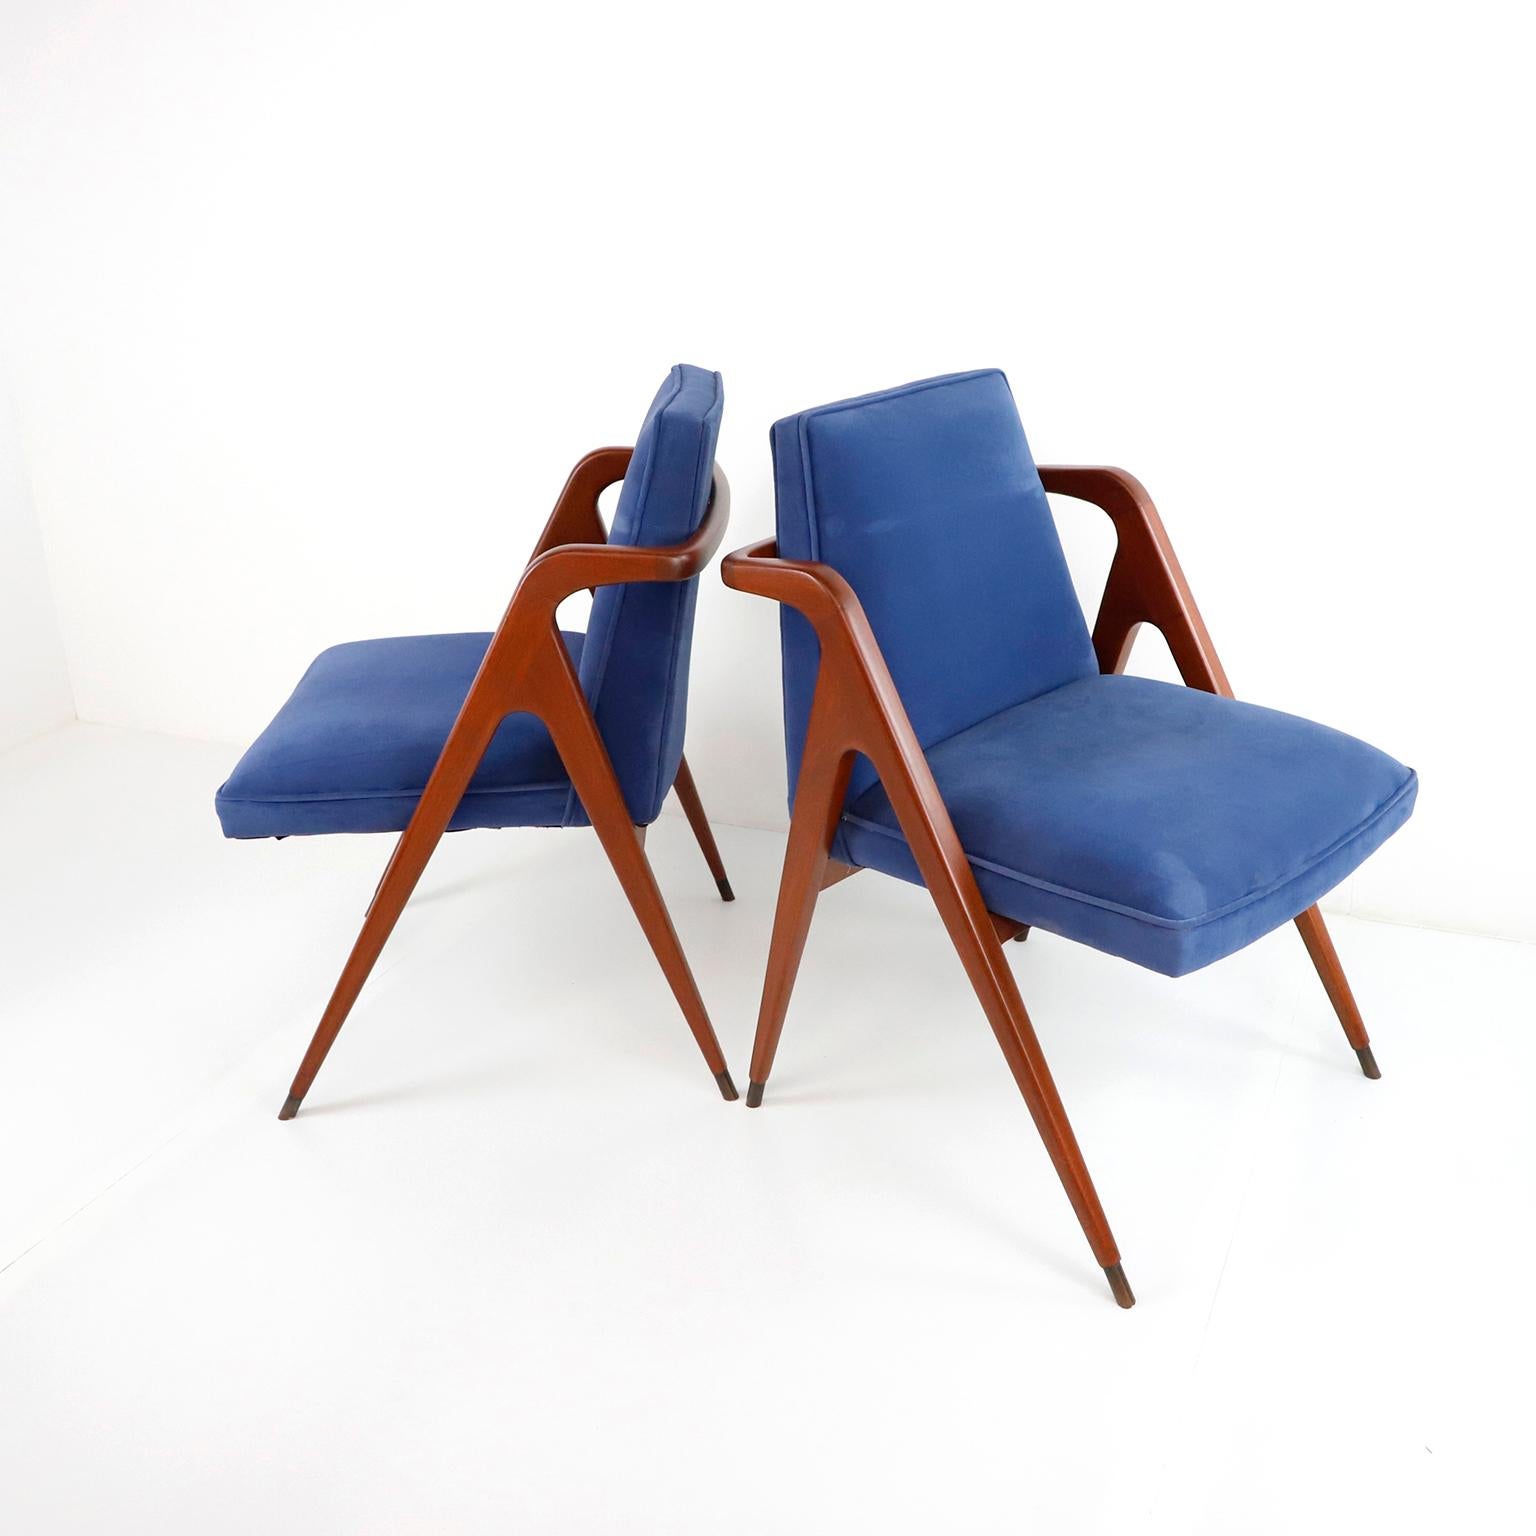 Circa 1960, we offer this Set of 4 Original Midcentury Mexican Chairs designed by Eugenio Escudero for D’Escudero, S.A. This stunning chairs features a fantastic mahogany wood frame with sculptural, clean lines. The scissor-shaped tapered legs are